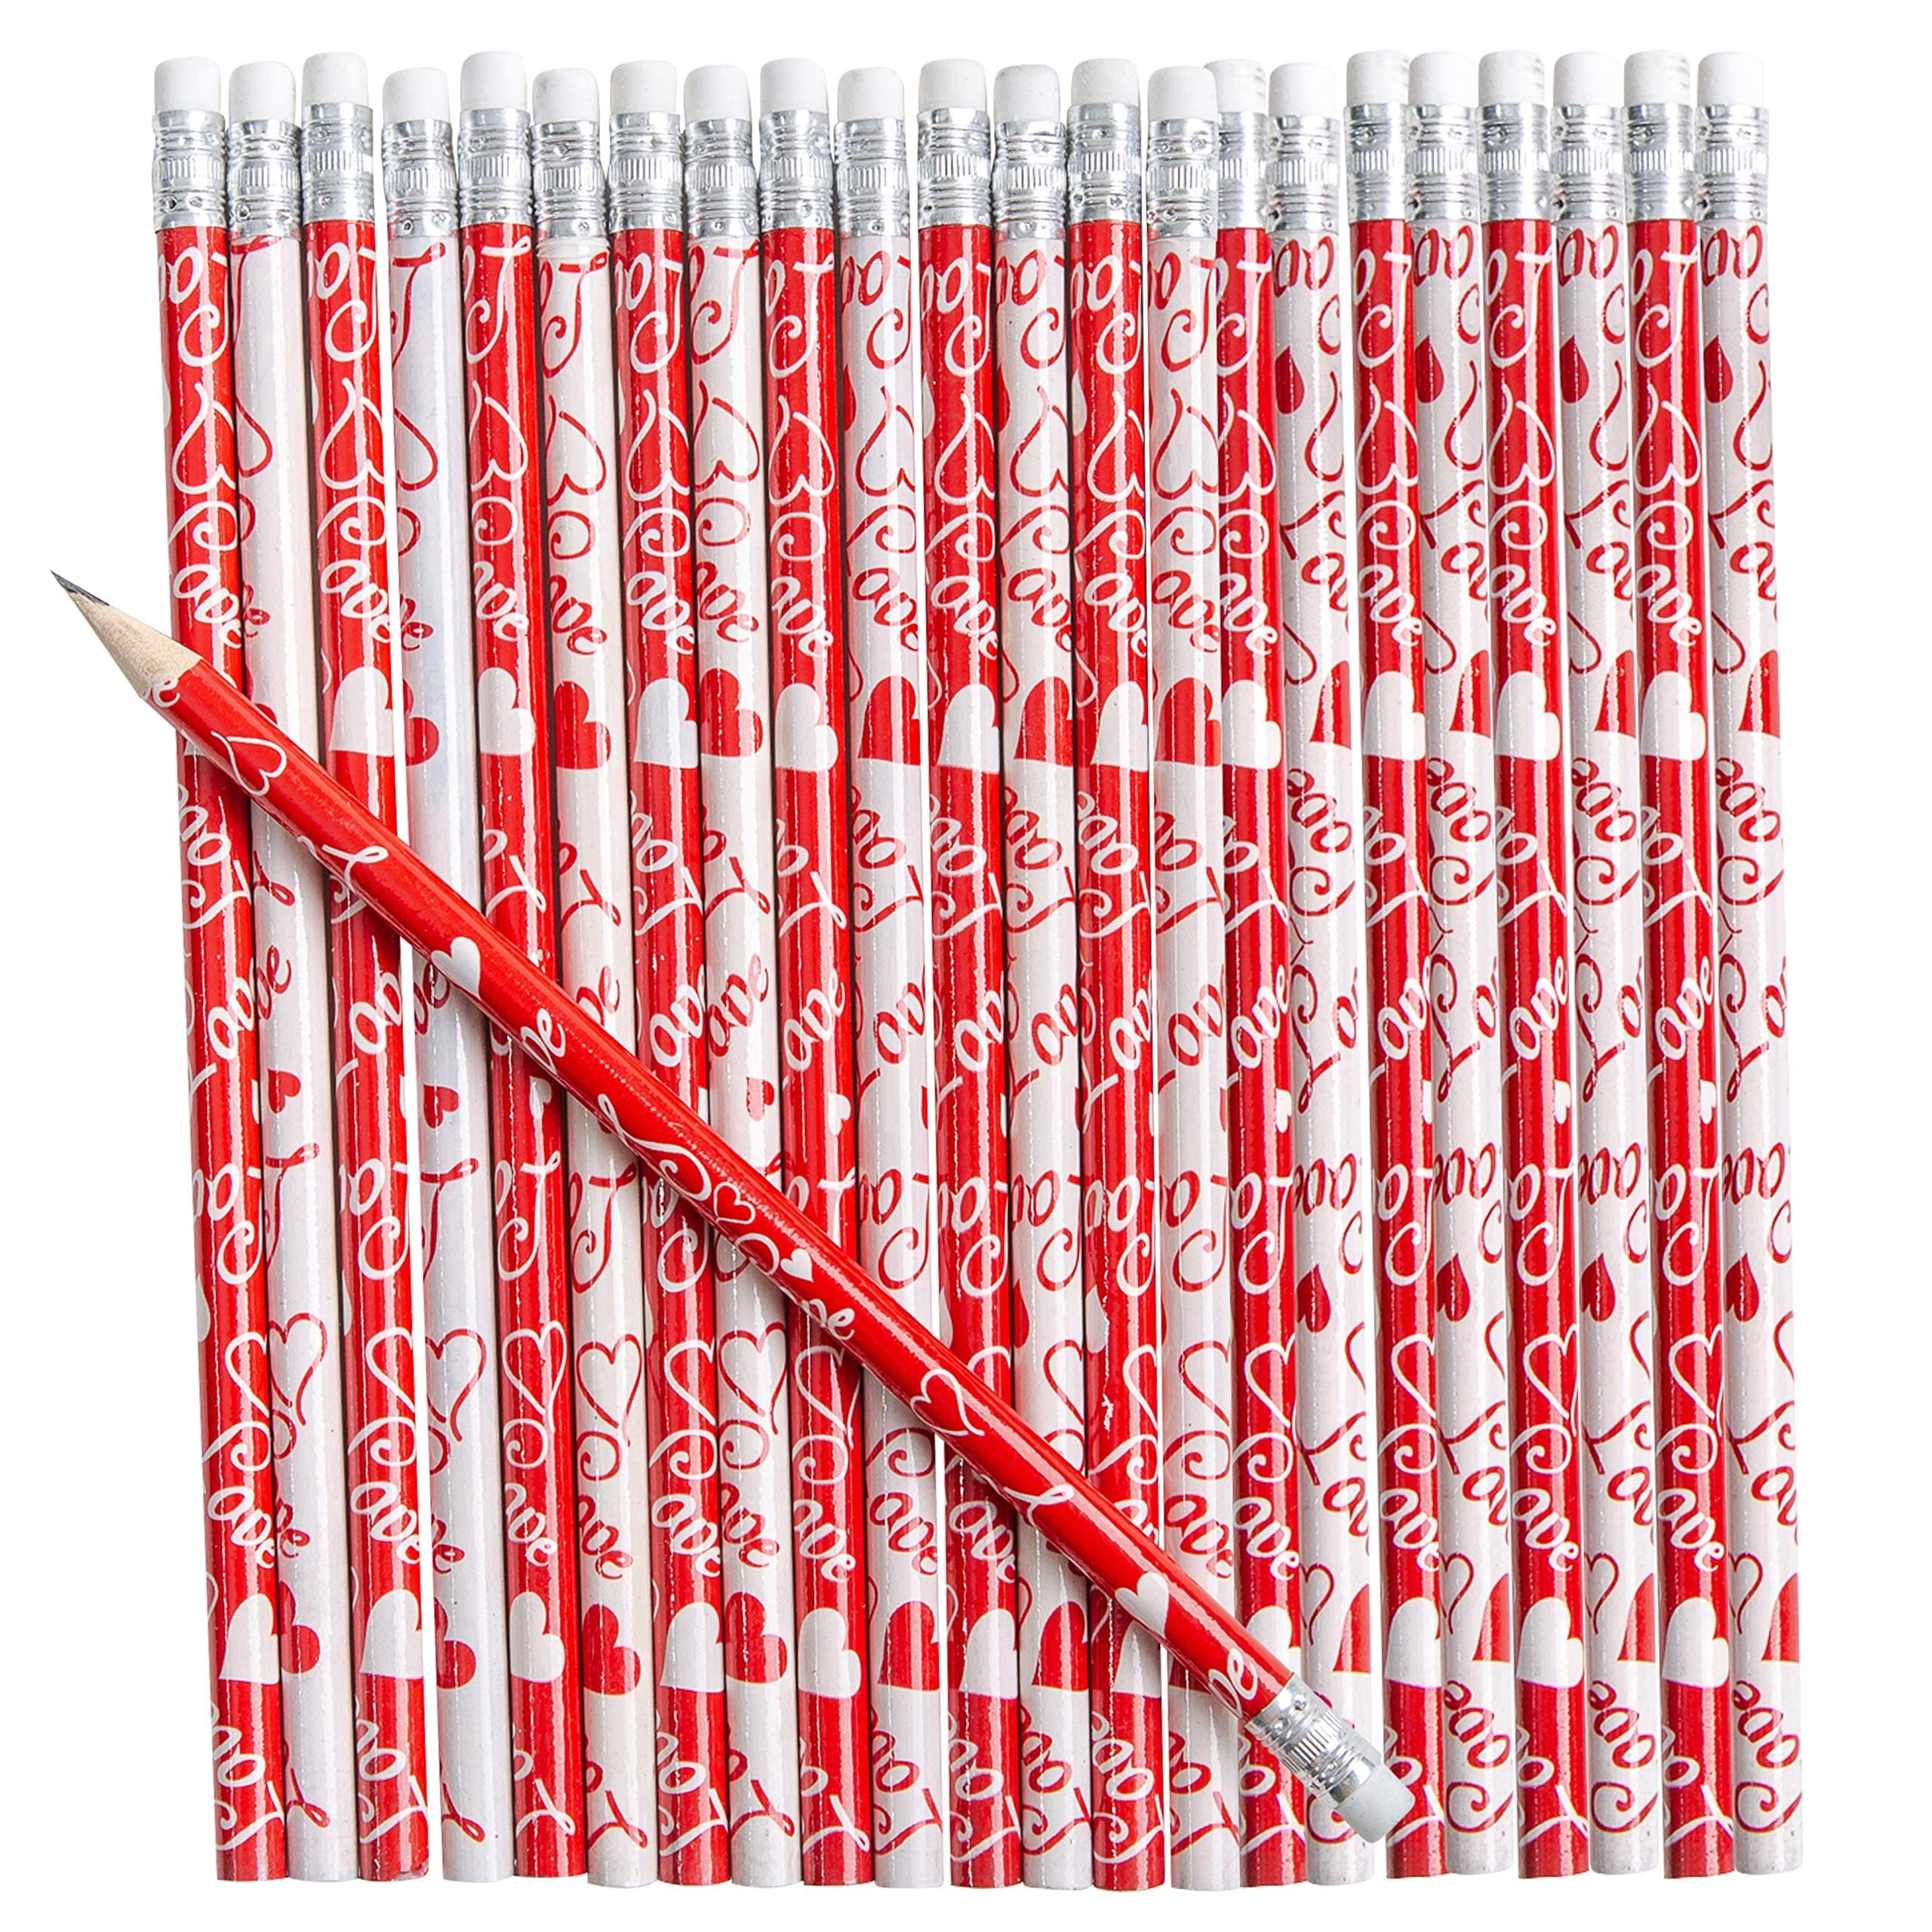  24 Valentine's Day Themed Holiday Pencils Bundle Pack